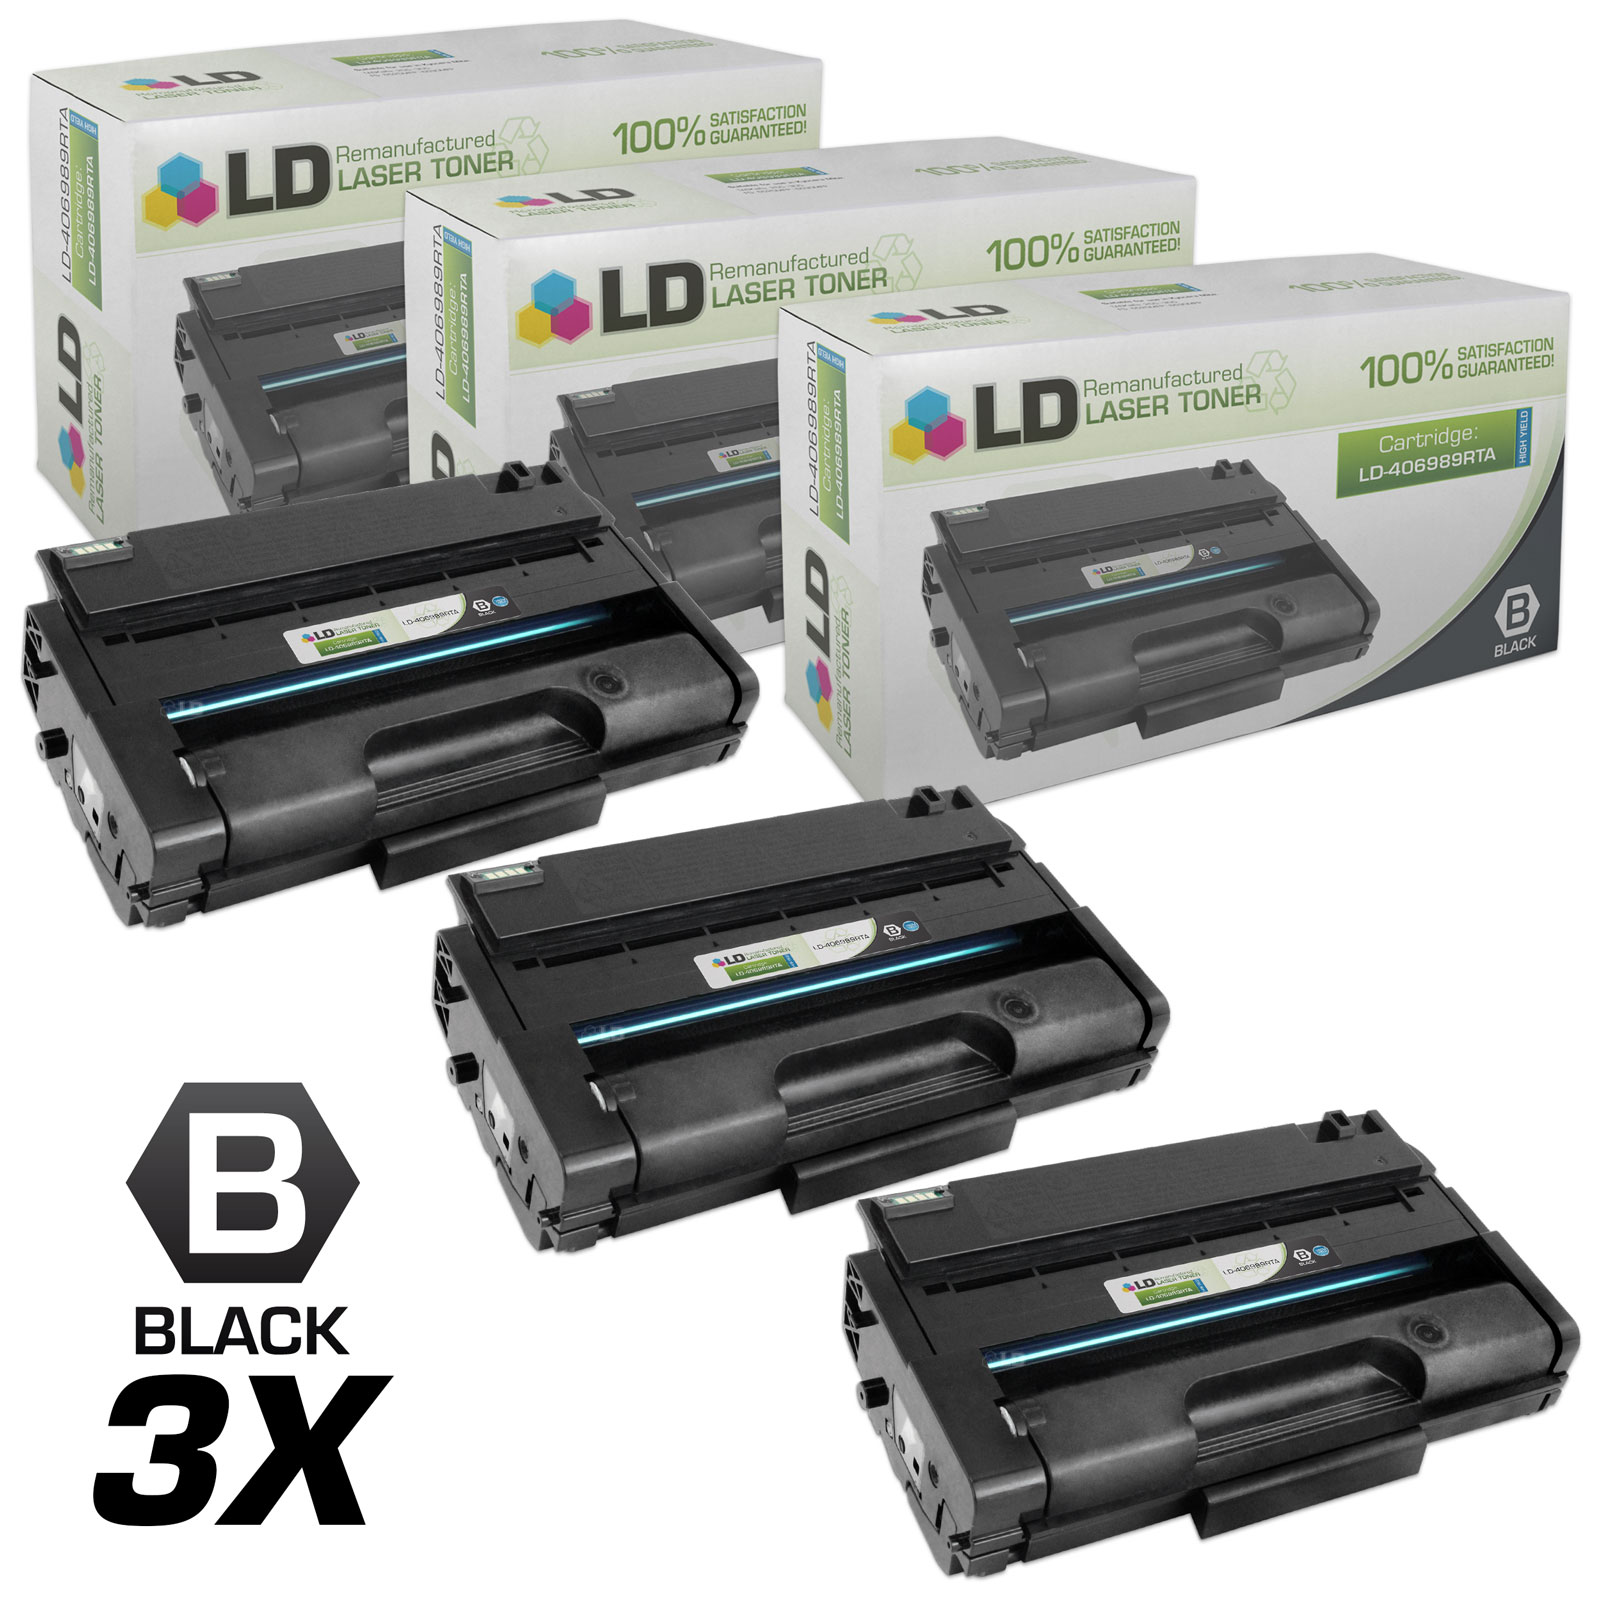 LD Remanufactured Replacements for Ricoh 406989 Set of 3 High Yield Black Laser Toner Cartridges for use in Ricoh Aficio SP 3500DN, 3500N, 3500SF, 3510DN, and 3510SF s - image 1 of 6